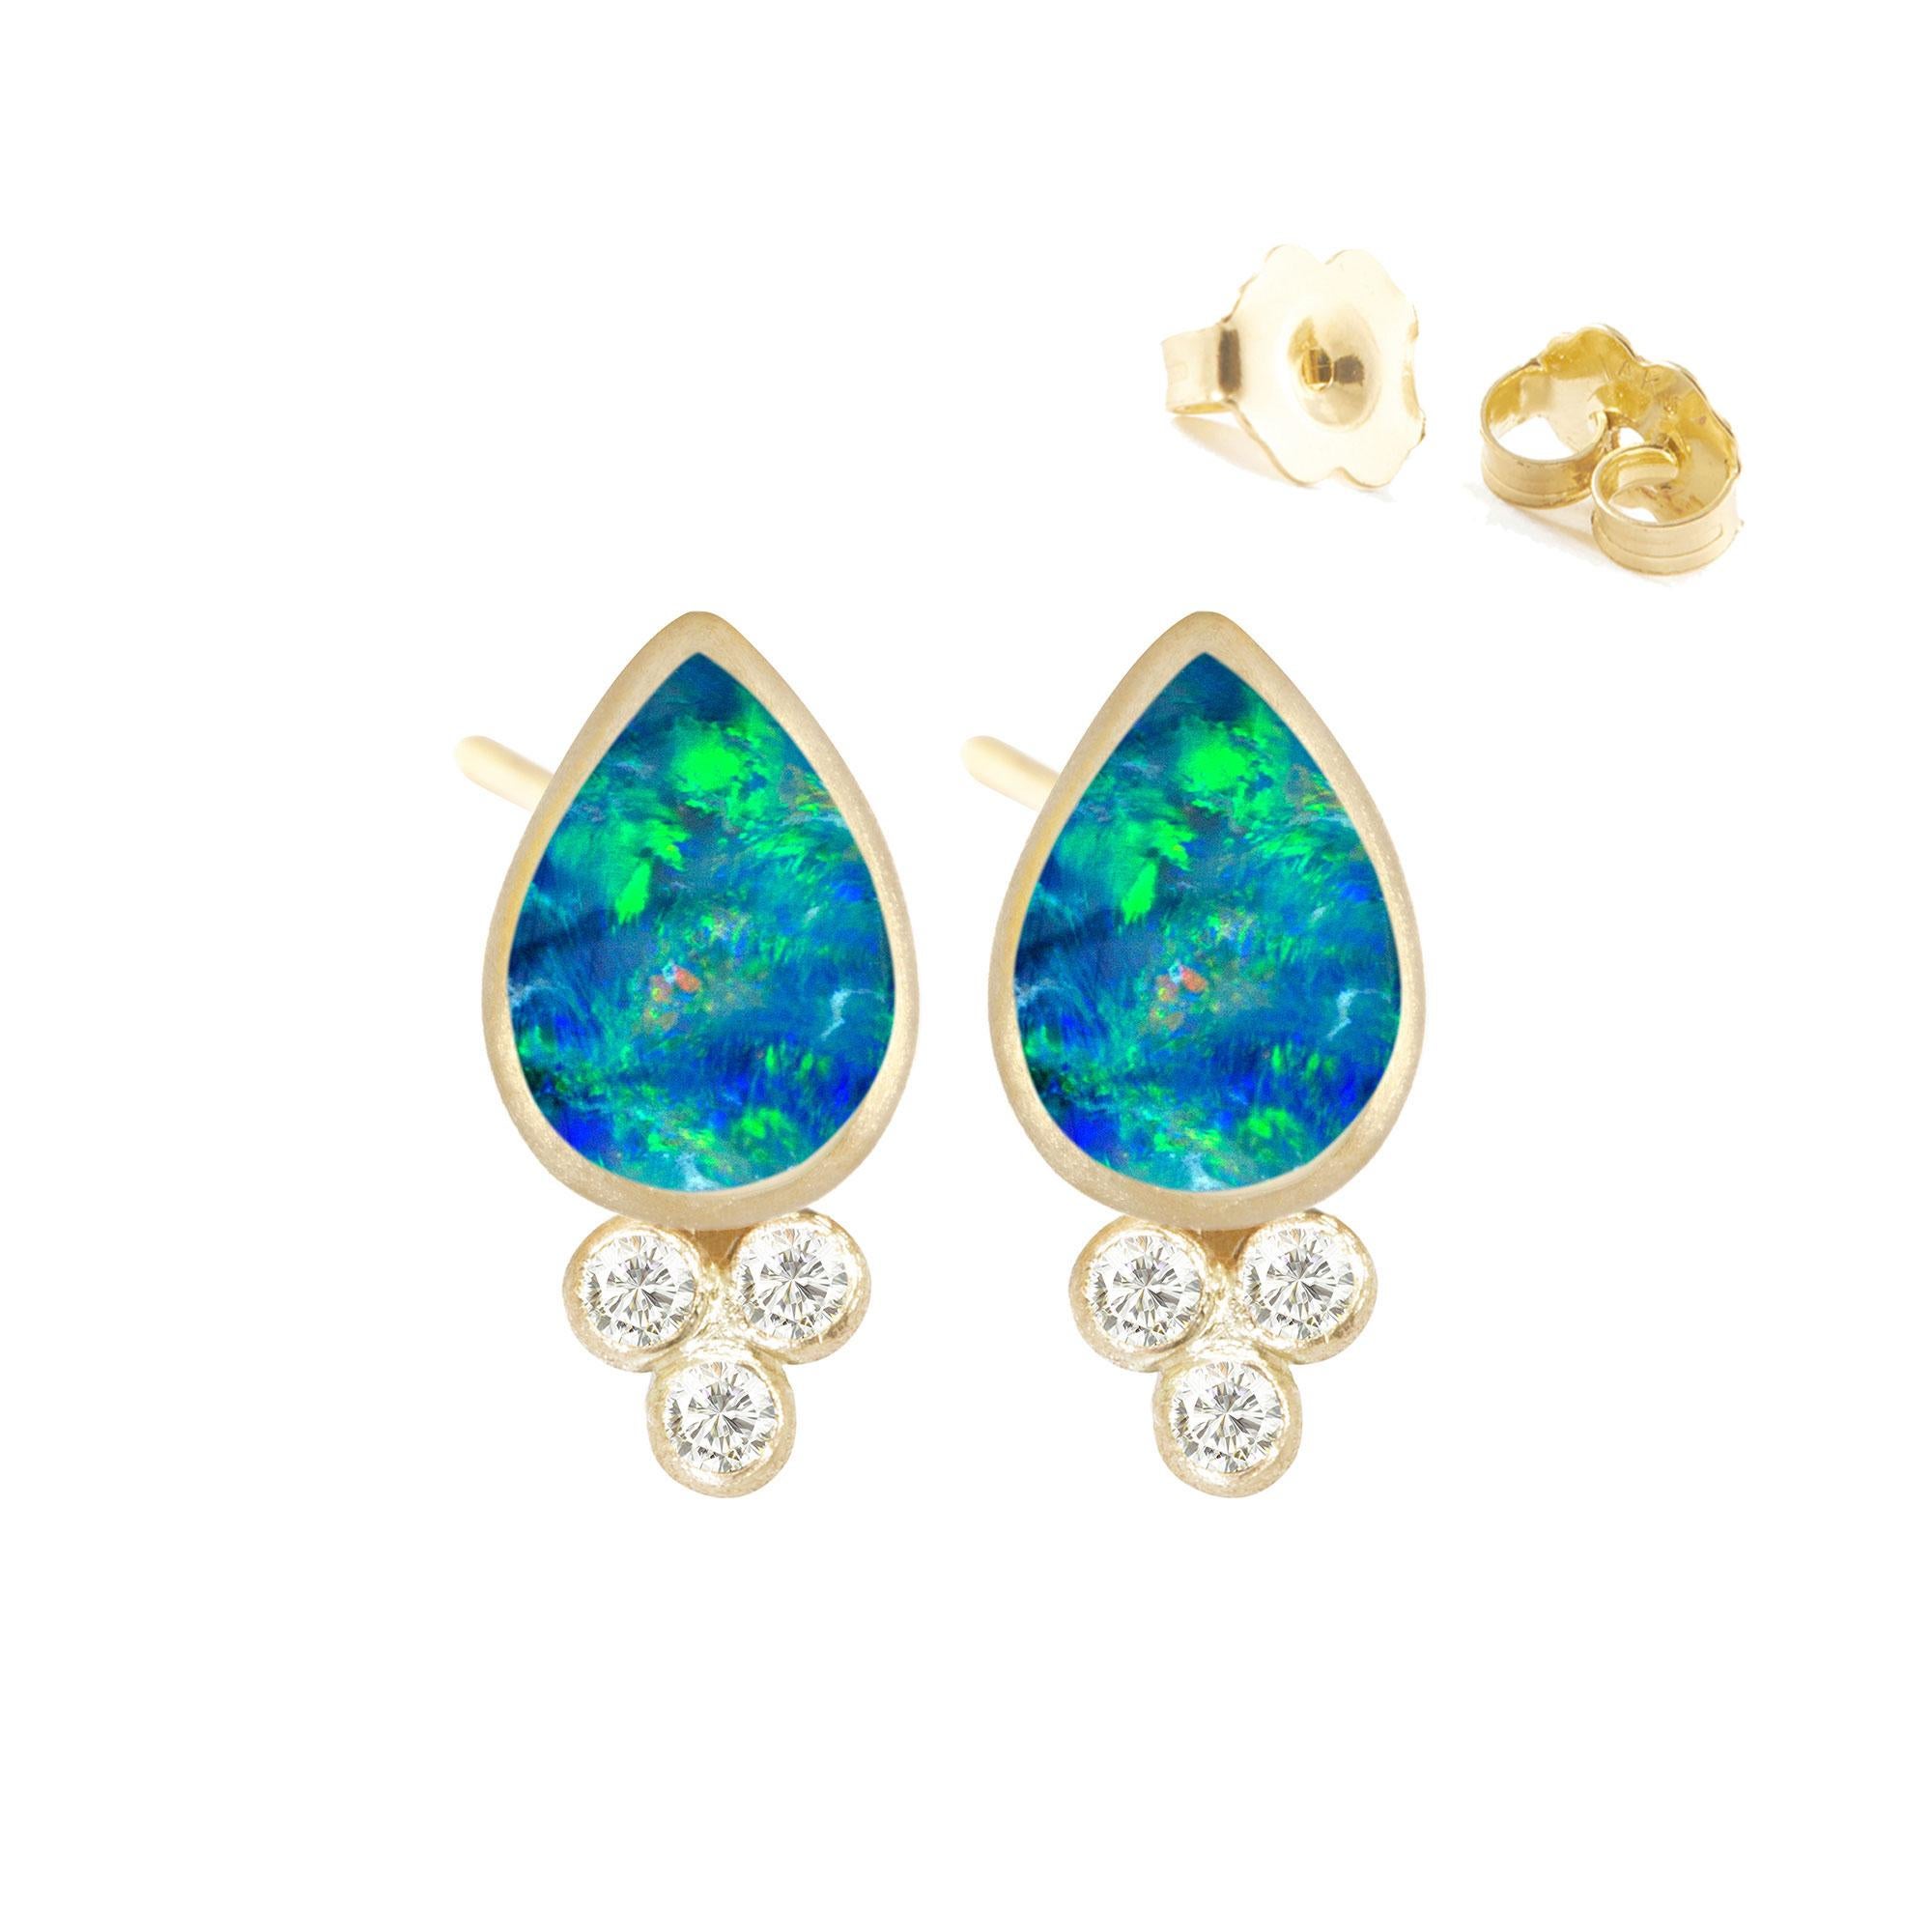 Made with bezel-set opal doublet, the diamond-accented Lilly Gold Studs are clean and elegant, and a very feminine style you can wear day in, day out.

Nina Nguyen Design's patent-pending earrings have an element on the back of the stud or charm to